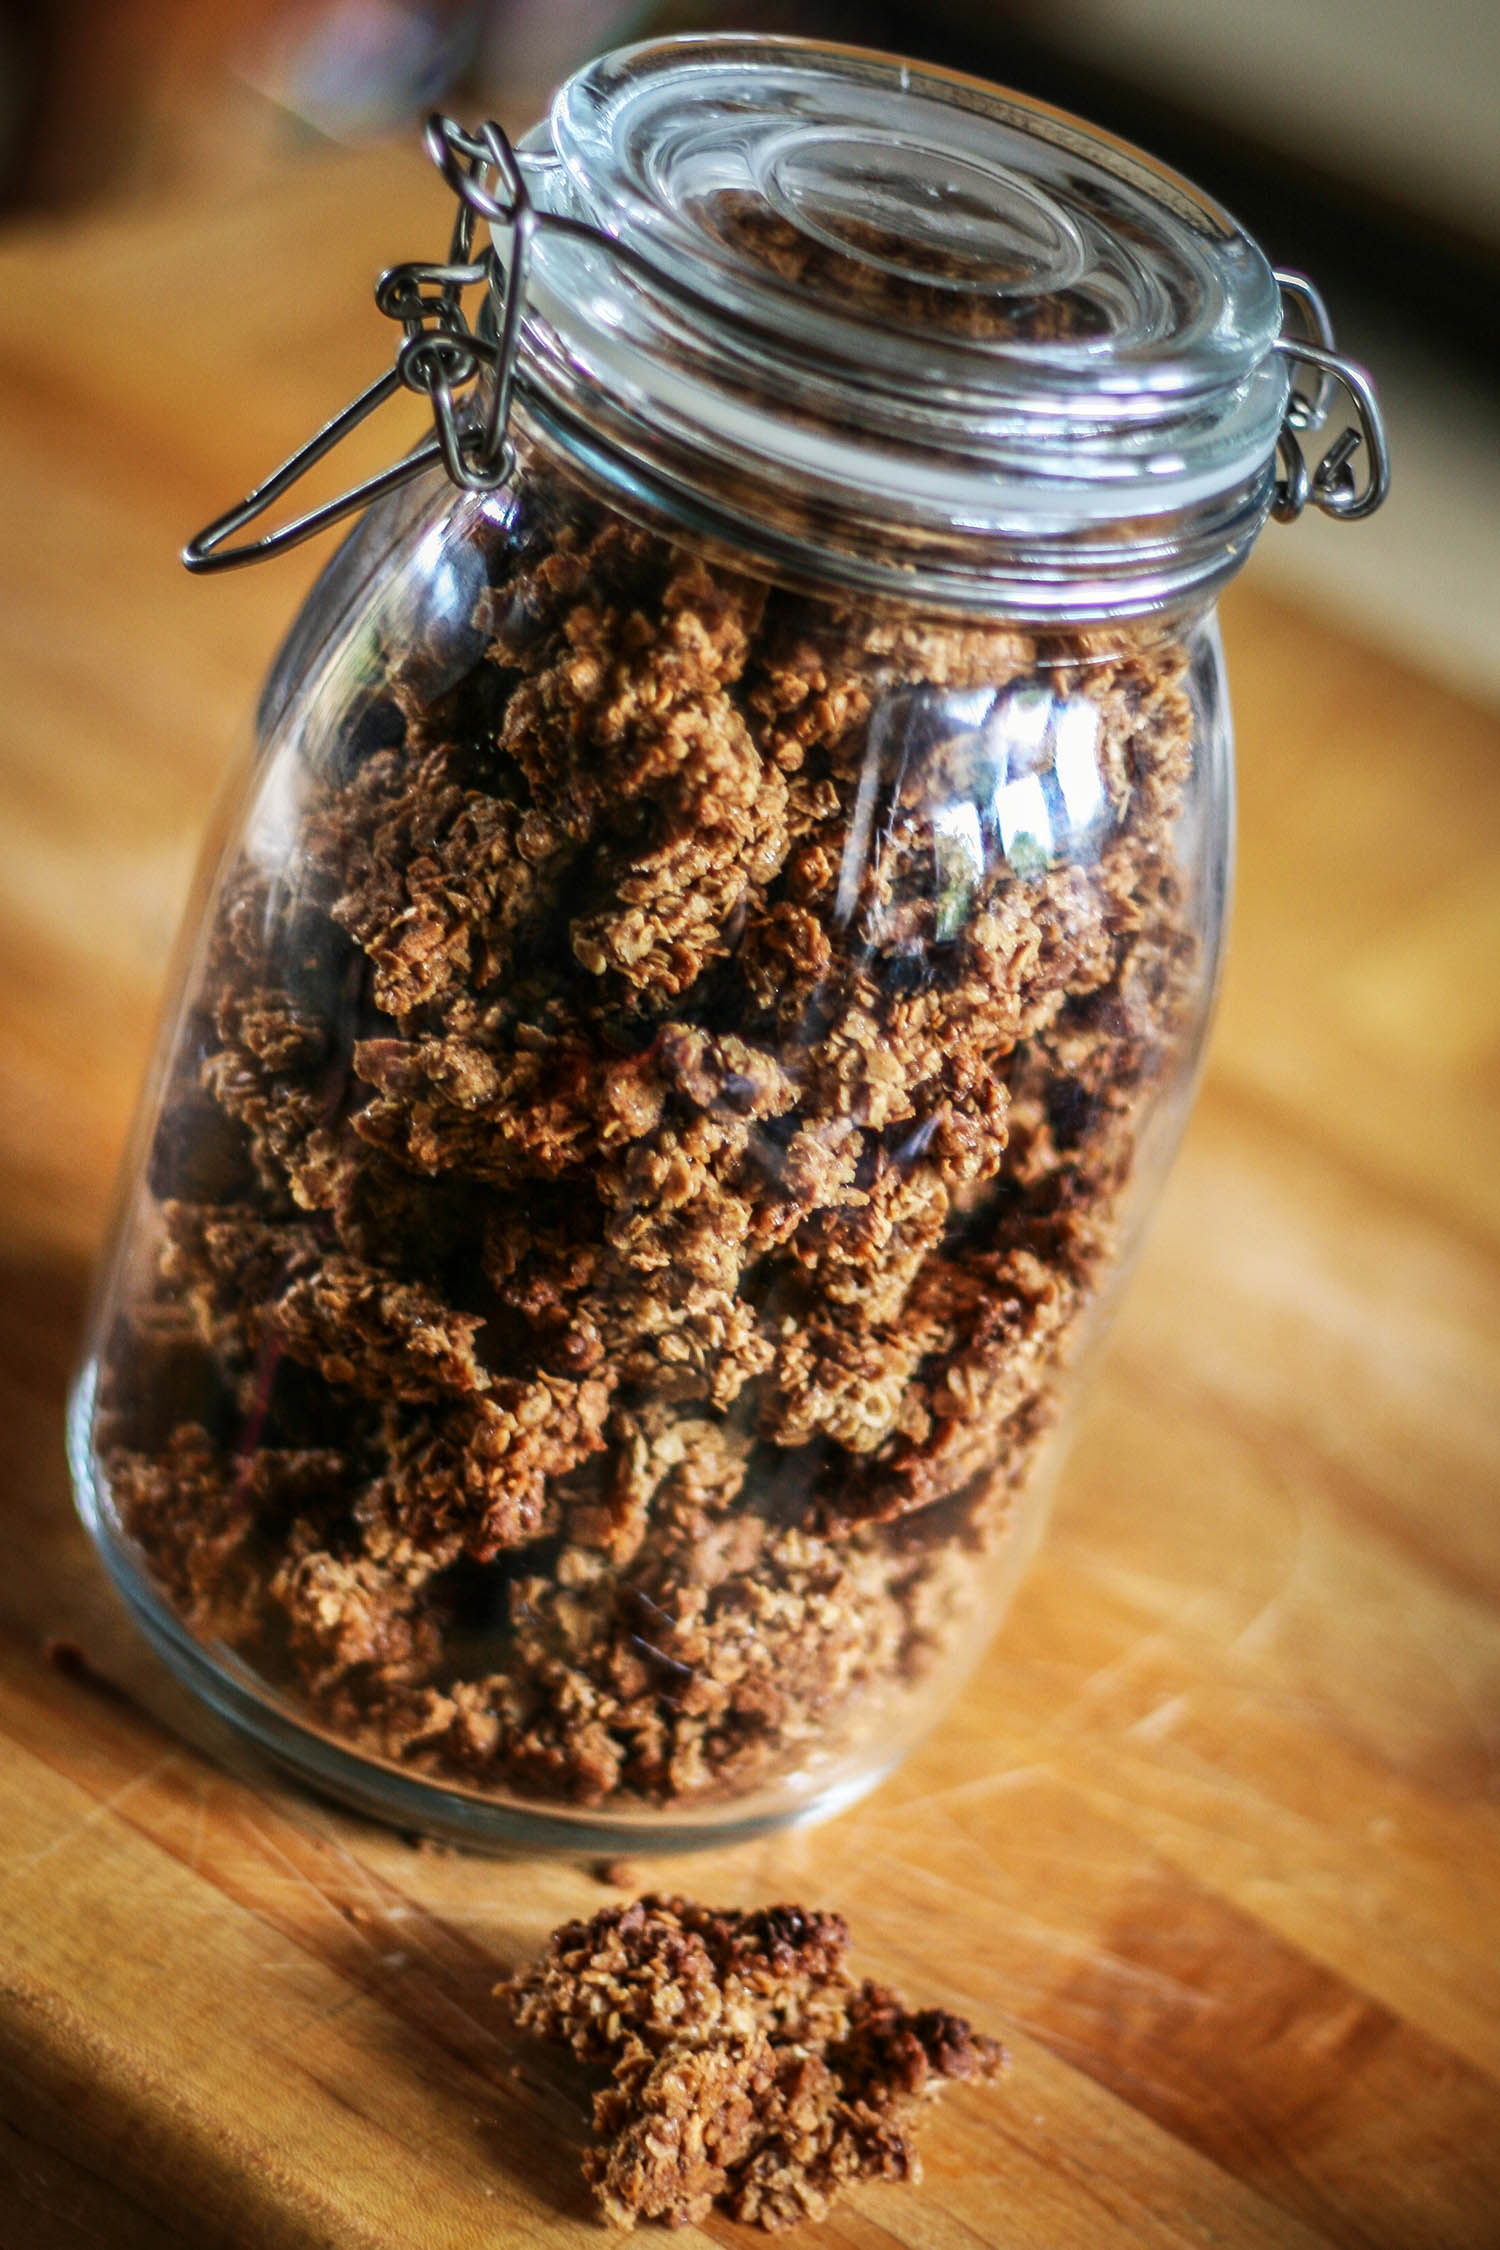 Large glass jar containing pieces of homemade granola